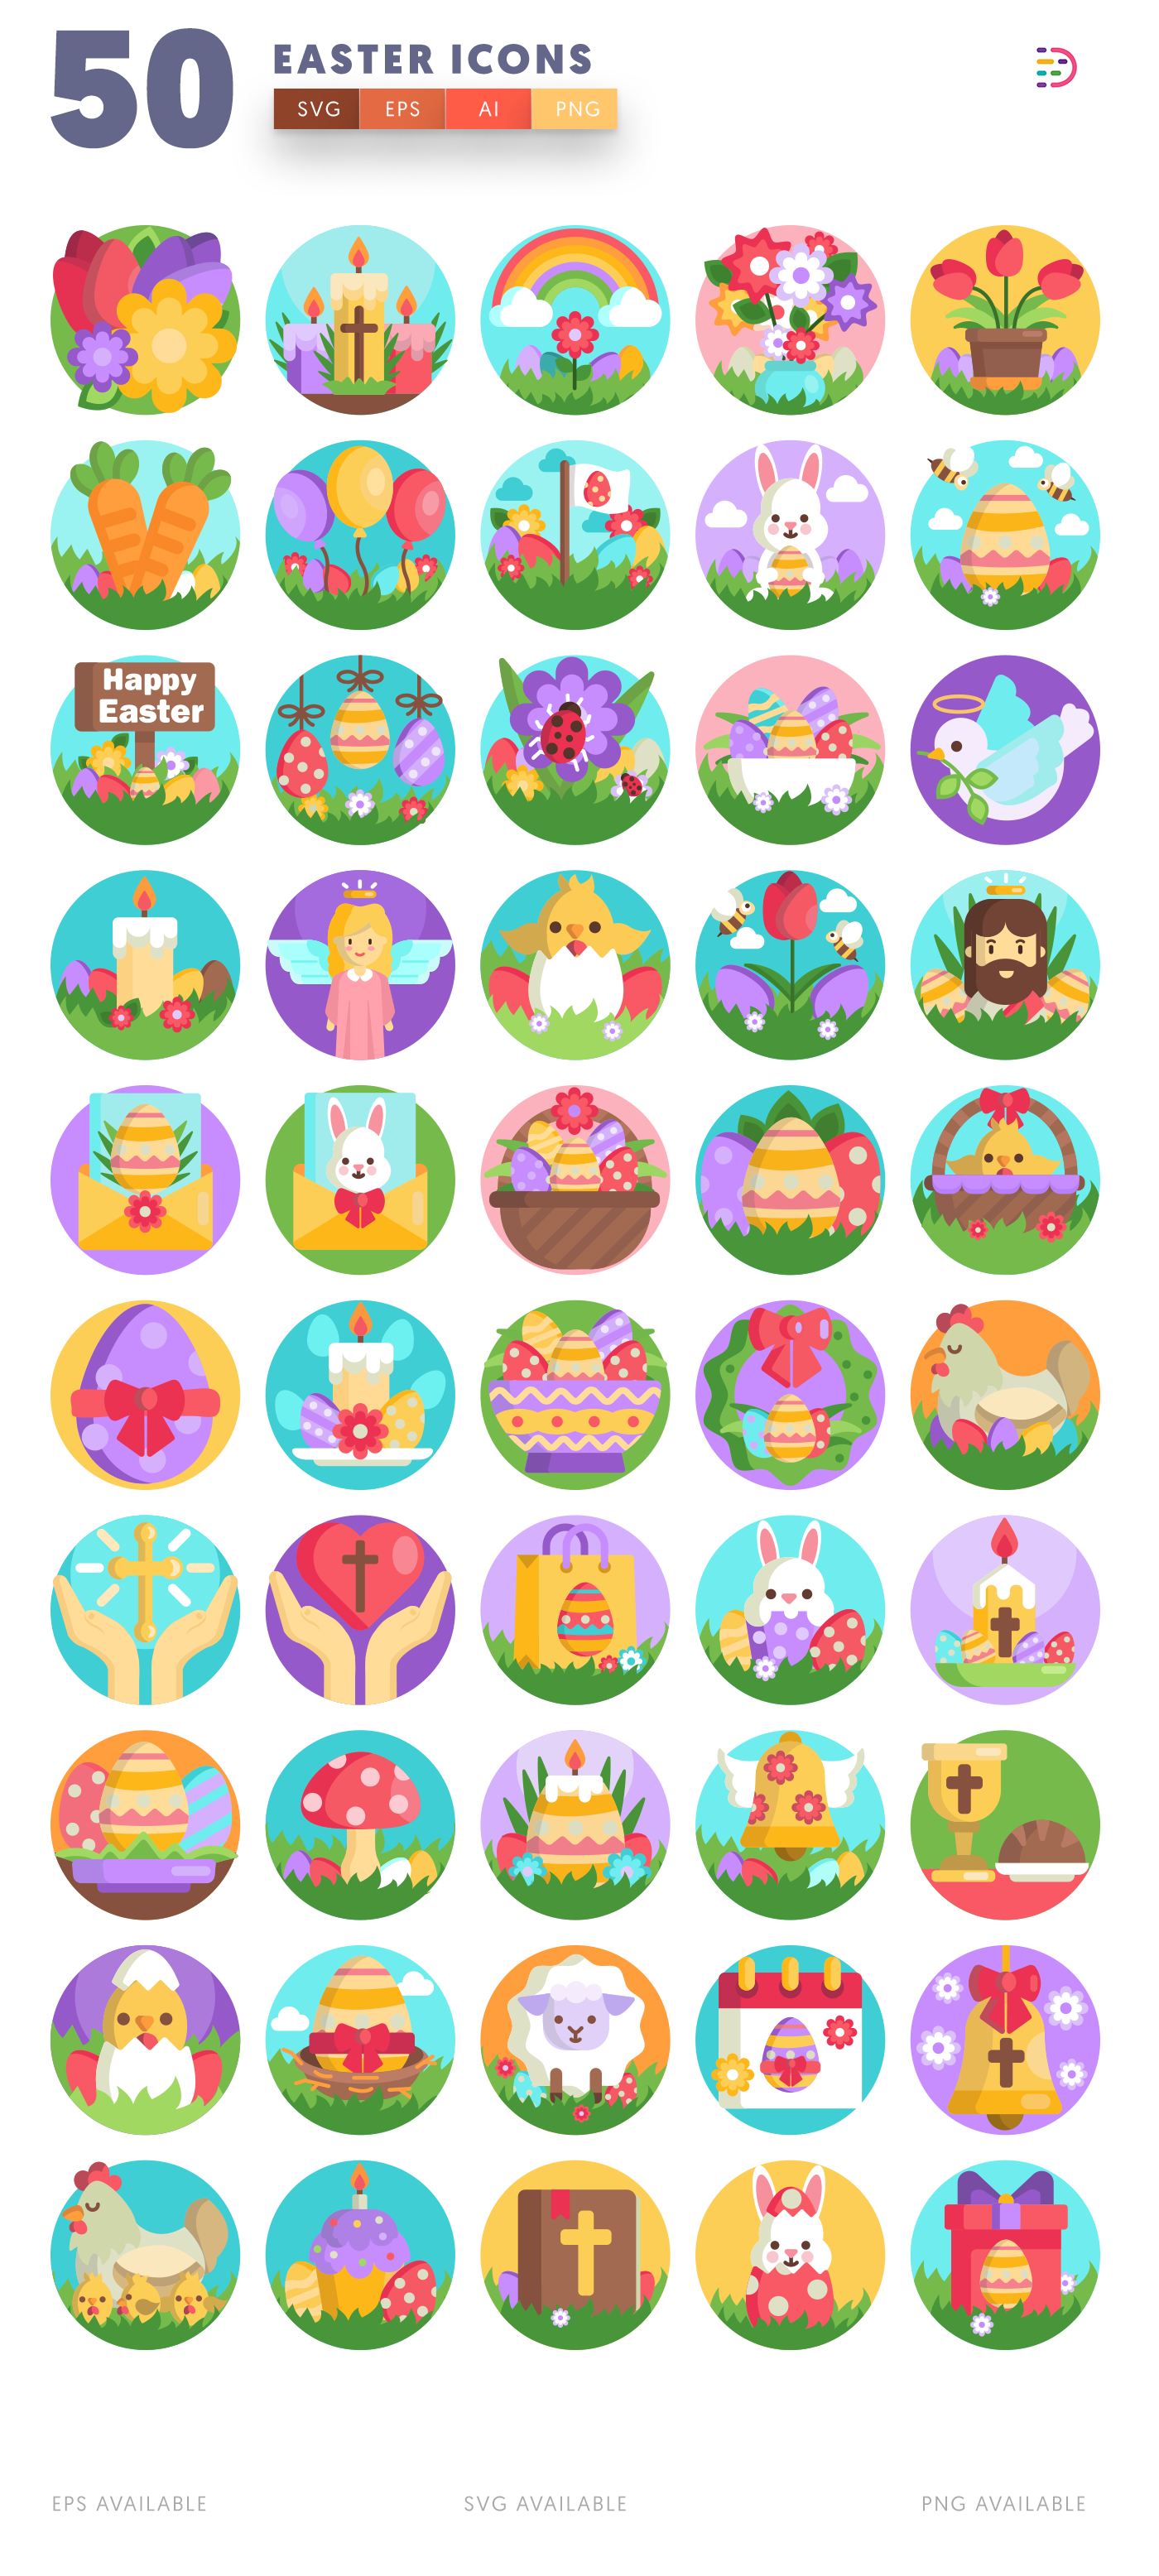 Design ready Easter Icons